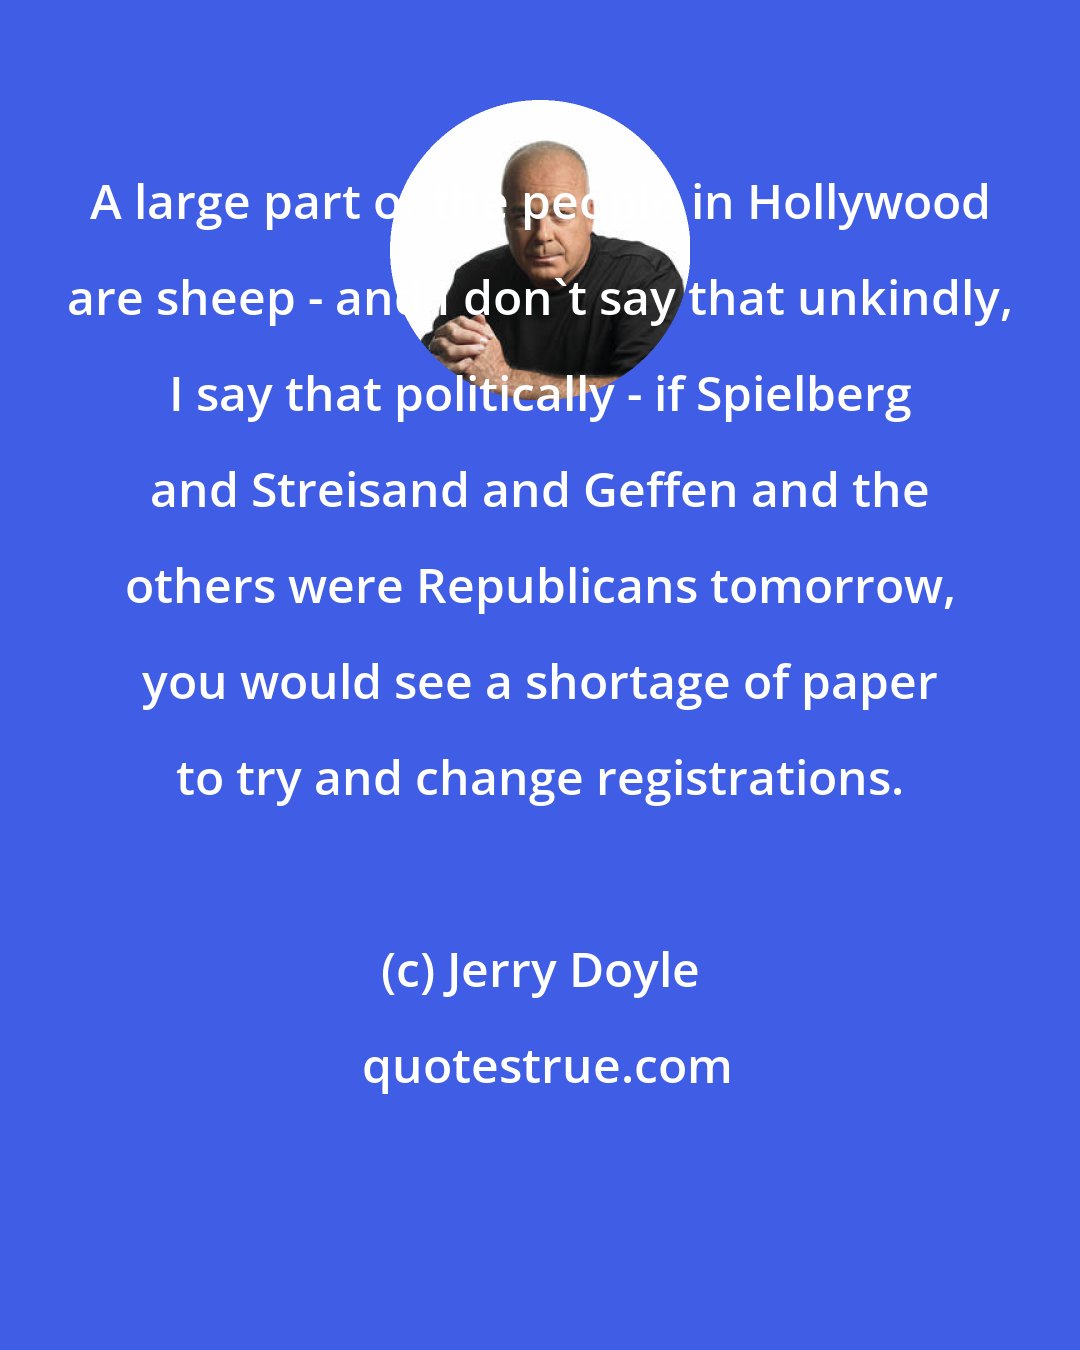 Jerry Doyle: A large part of the people in Hollywood are sheep - and I don't say that unkindly, I say that politically - if Spielberg and Streisand and Geffen and the others were Republicans tomorrow, you would see a shortage of paper to try and change registrations.